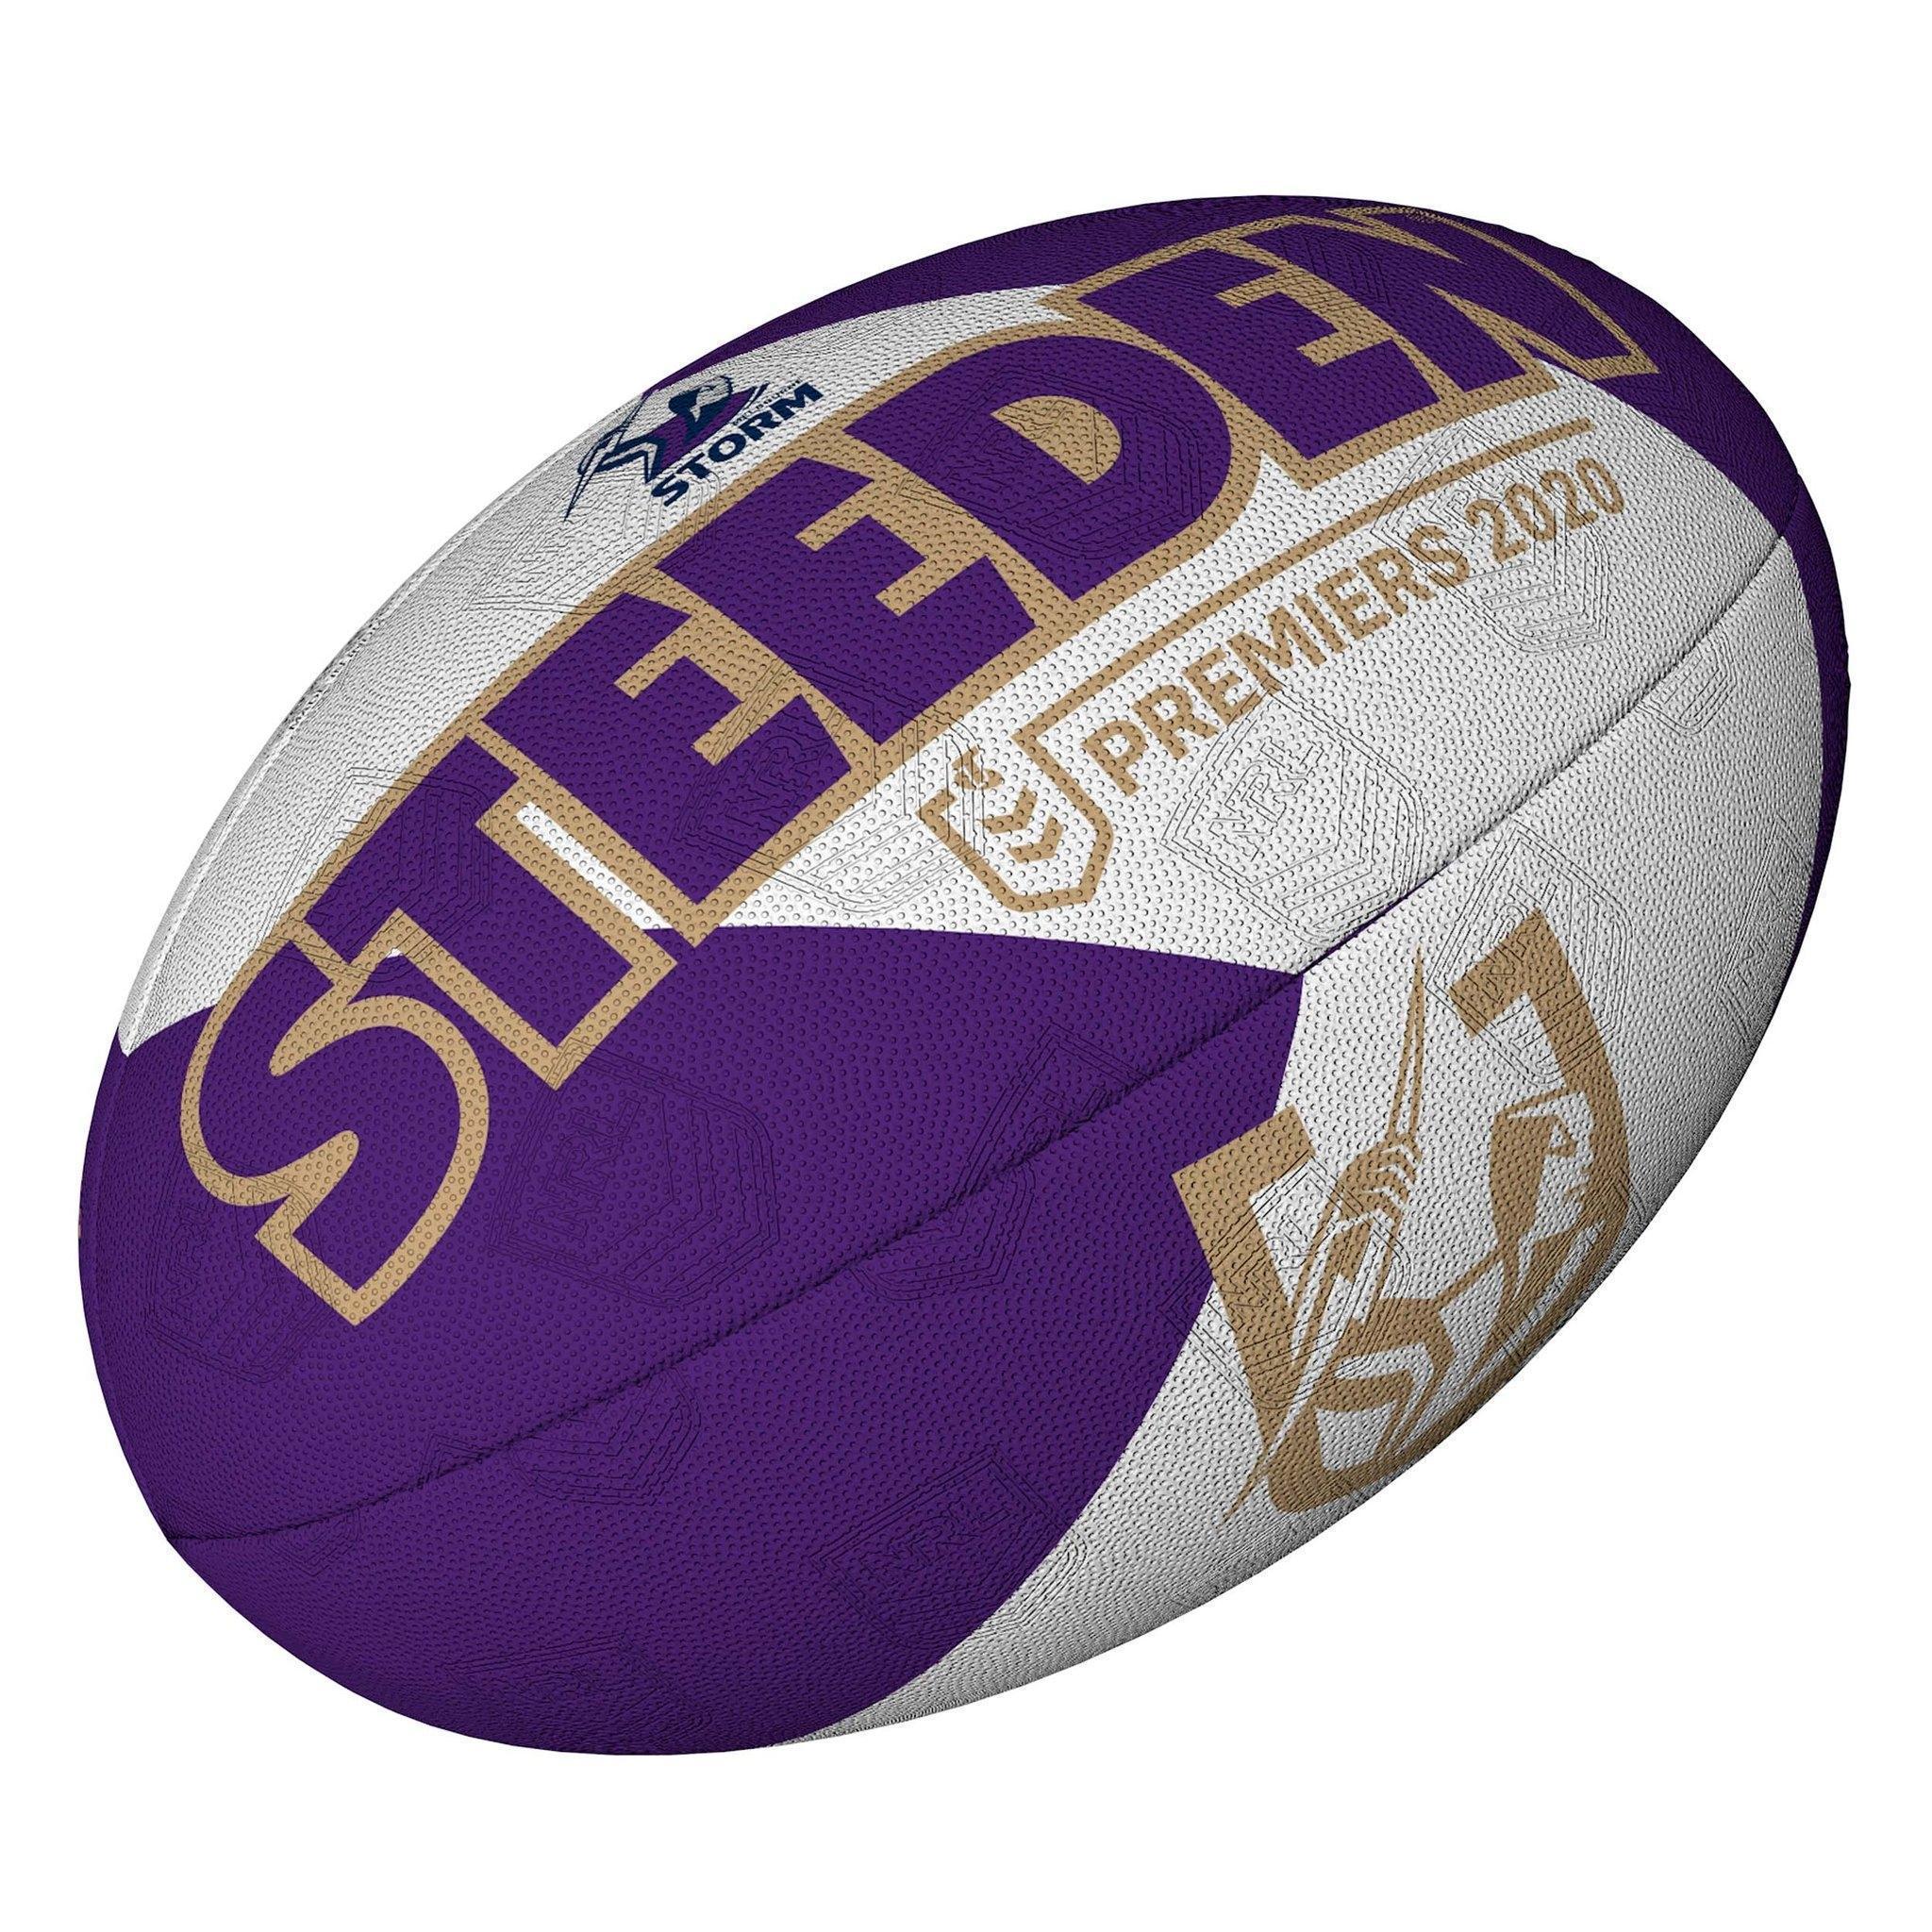 Melbourne Storm 2020 NRL Premiers Full Size 5 Large Football Foot Ball Footy